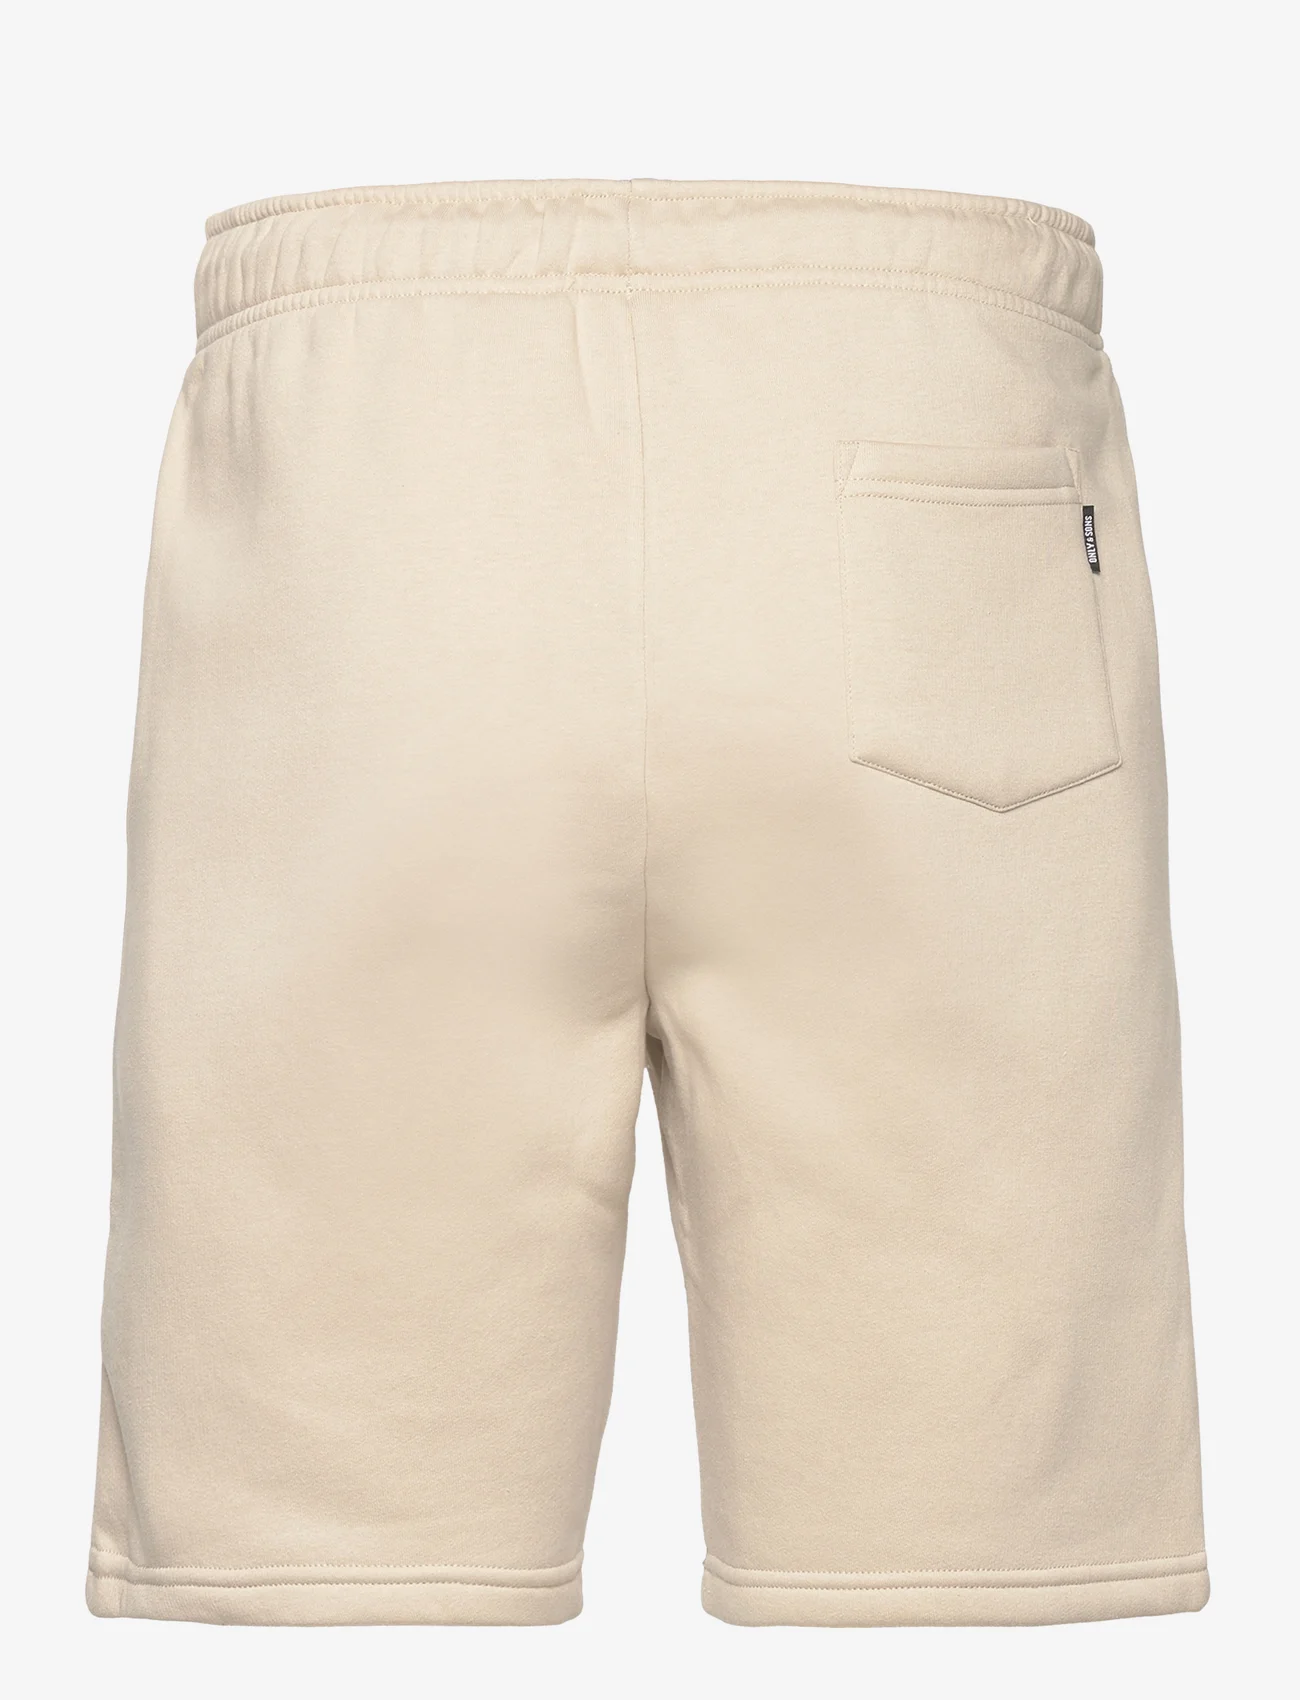 ONLY & SONS - ONSCERES SWEAT SHORTS - alhaisimmat hinnat - silver lining - 1